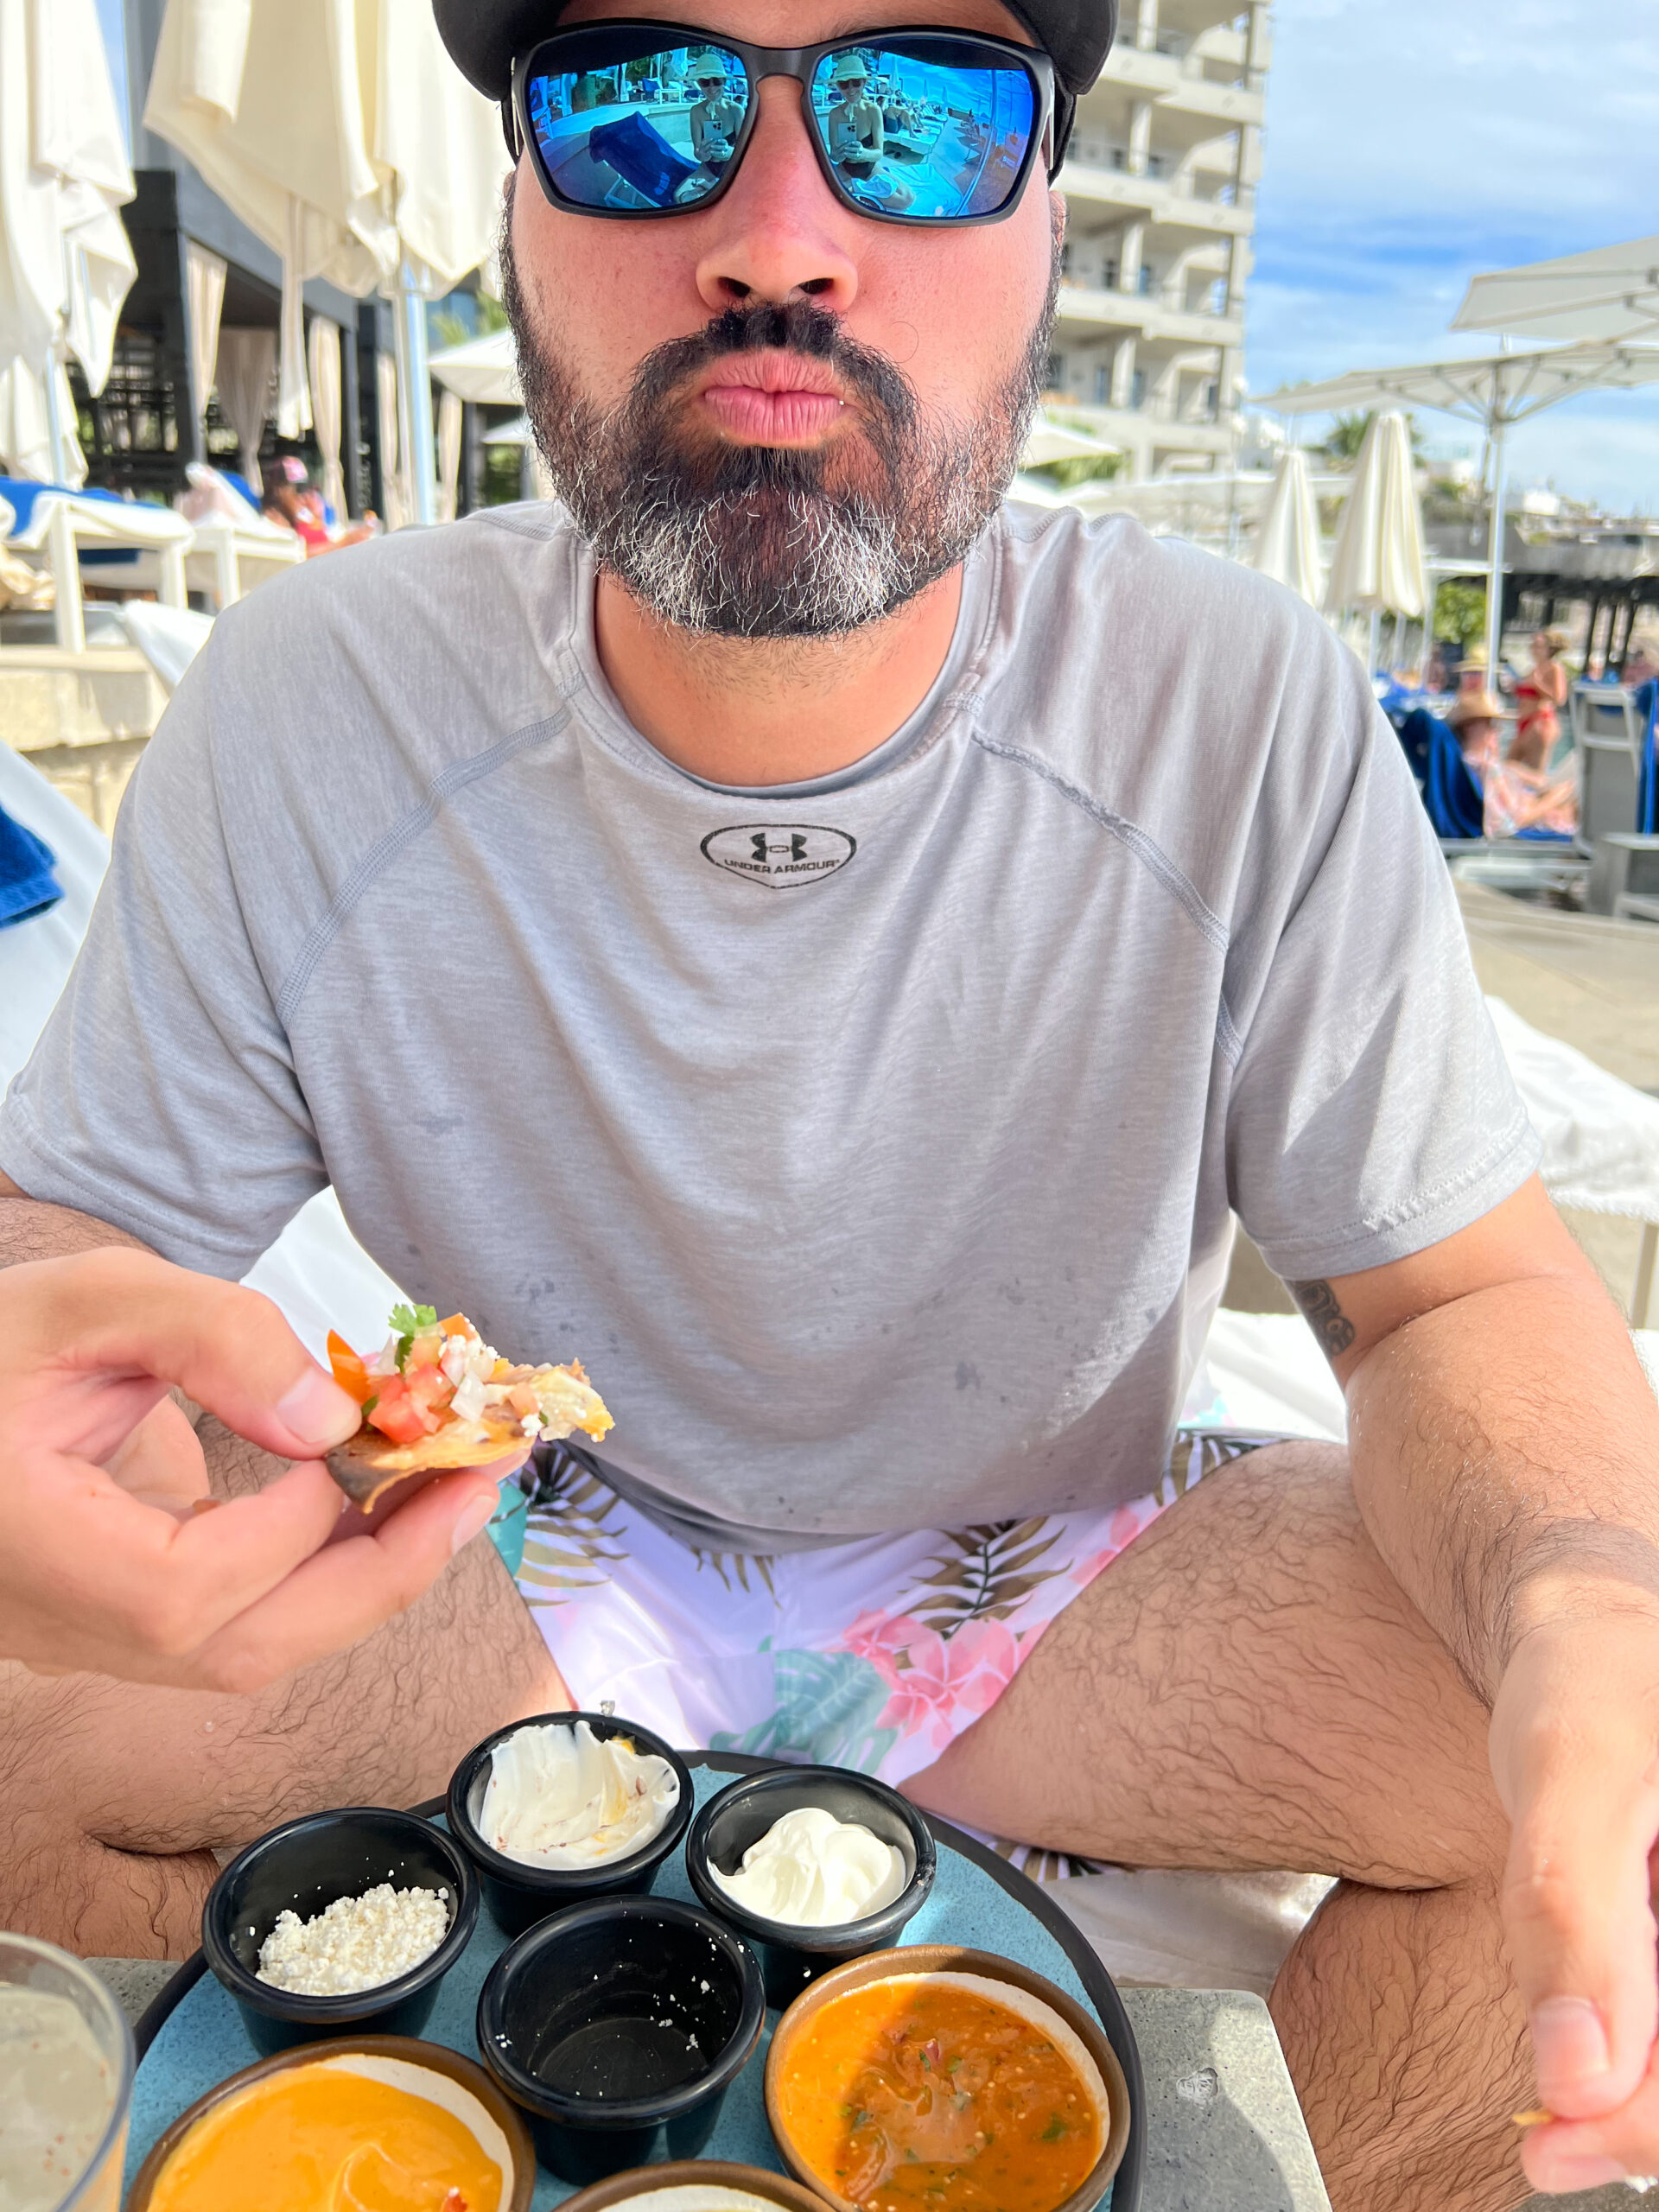 all the chips and dips poolside in Cabo at the Cape #thecape #theldltravles #mexico